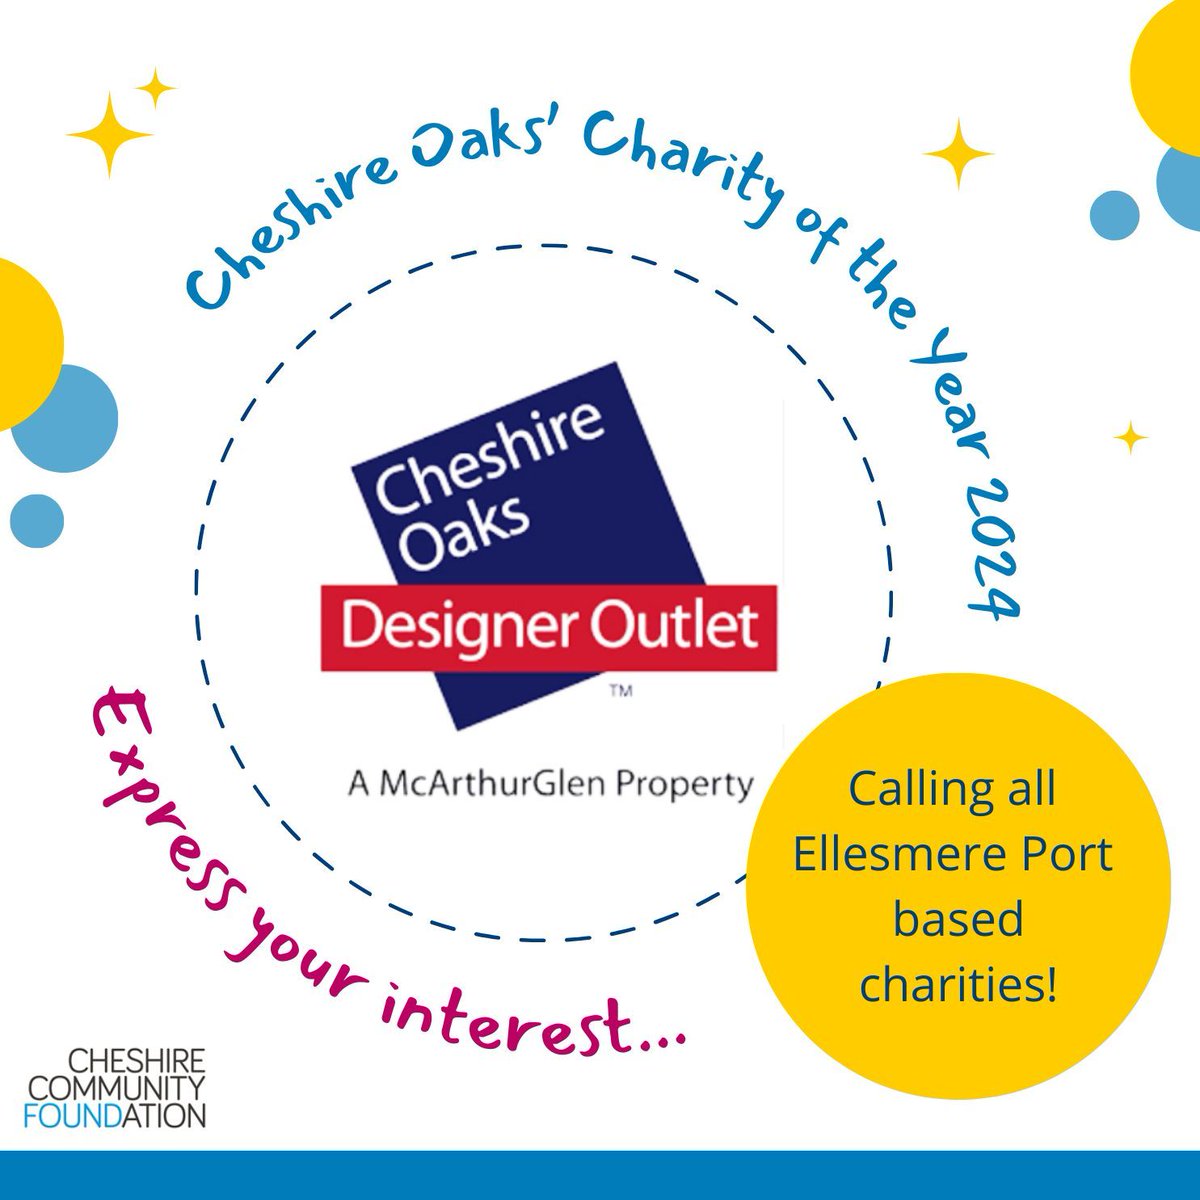 Calling all charities in Ellesmere Port - Cheshire Oaks is offering one charity supporting people in Ellesmere Port the unique opportunity to partner with them as their Charity of the Year for 2024! Visit our website if you’d like to express your interest buff.ly/3ZNaMNw